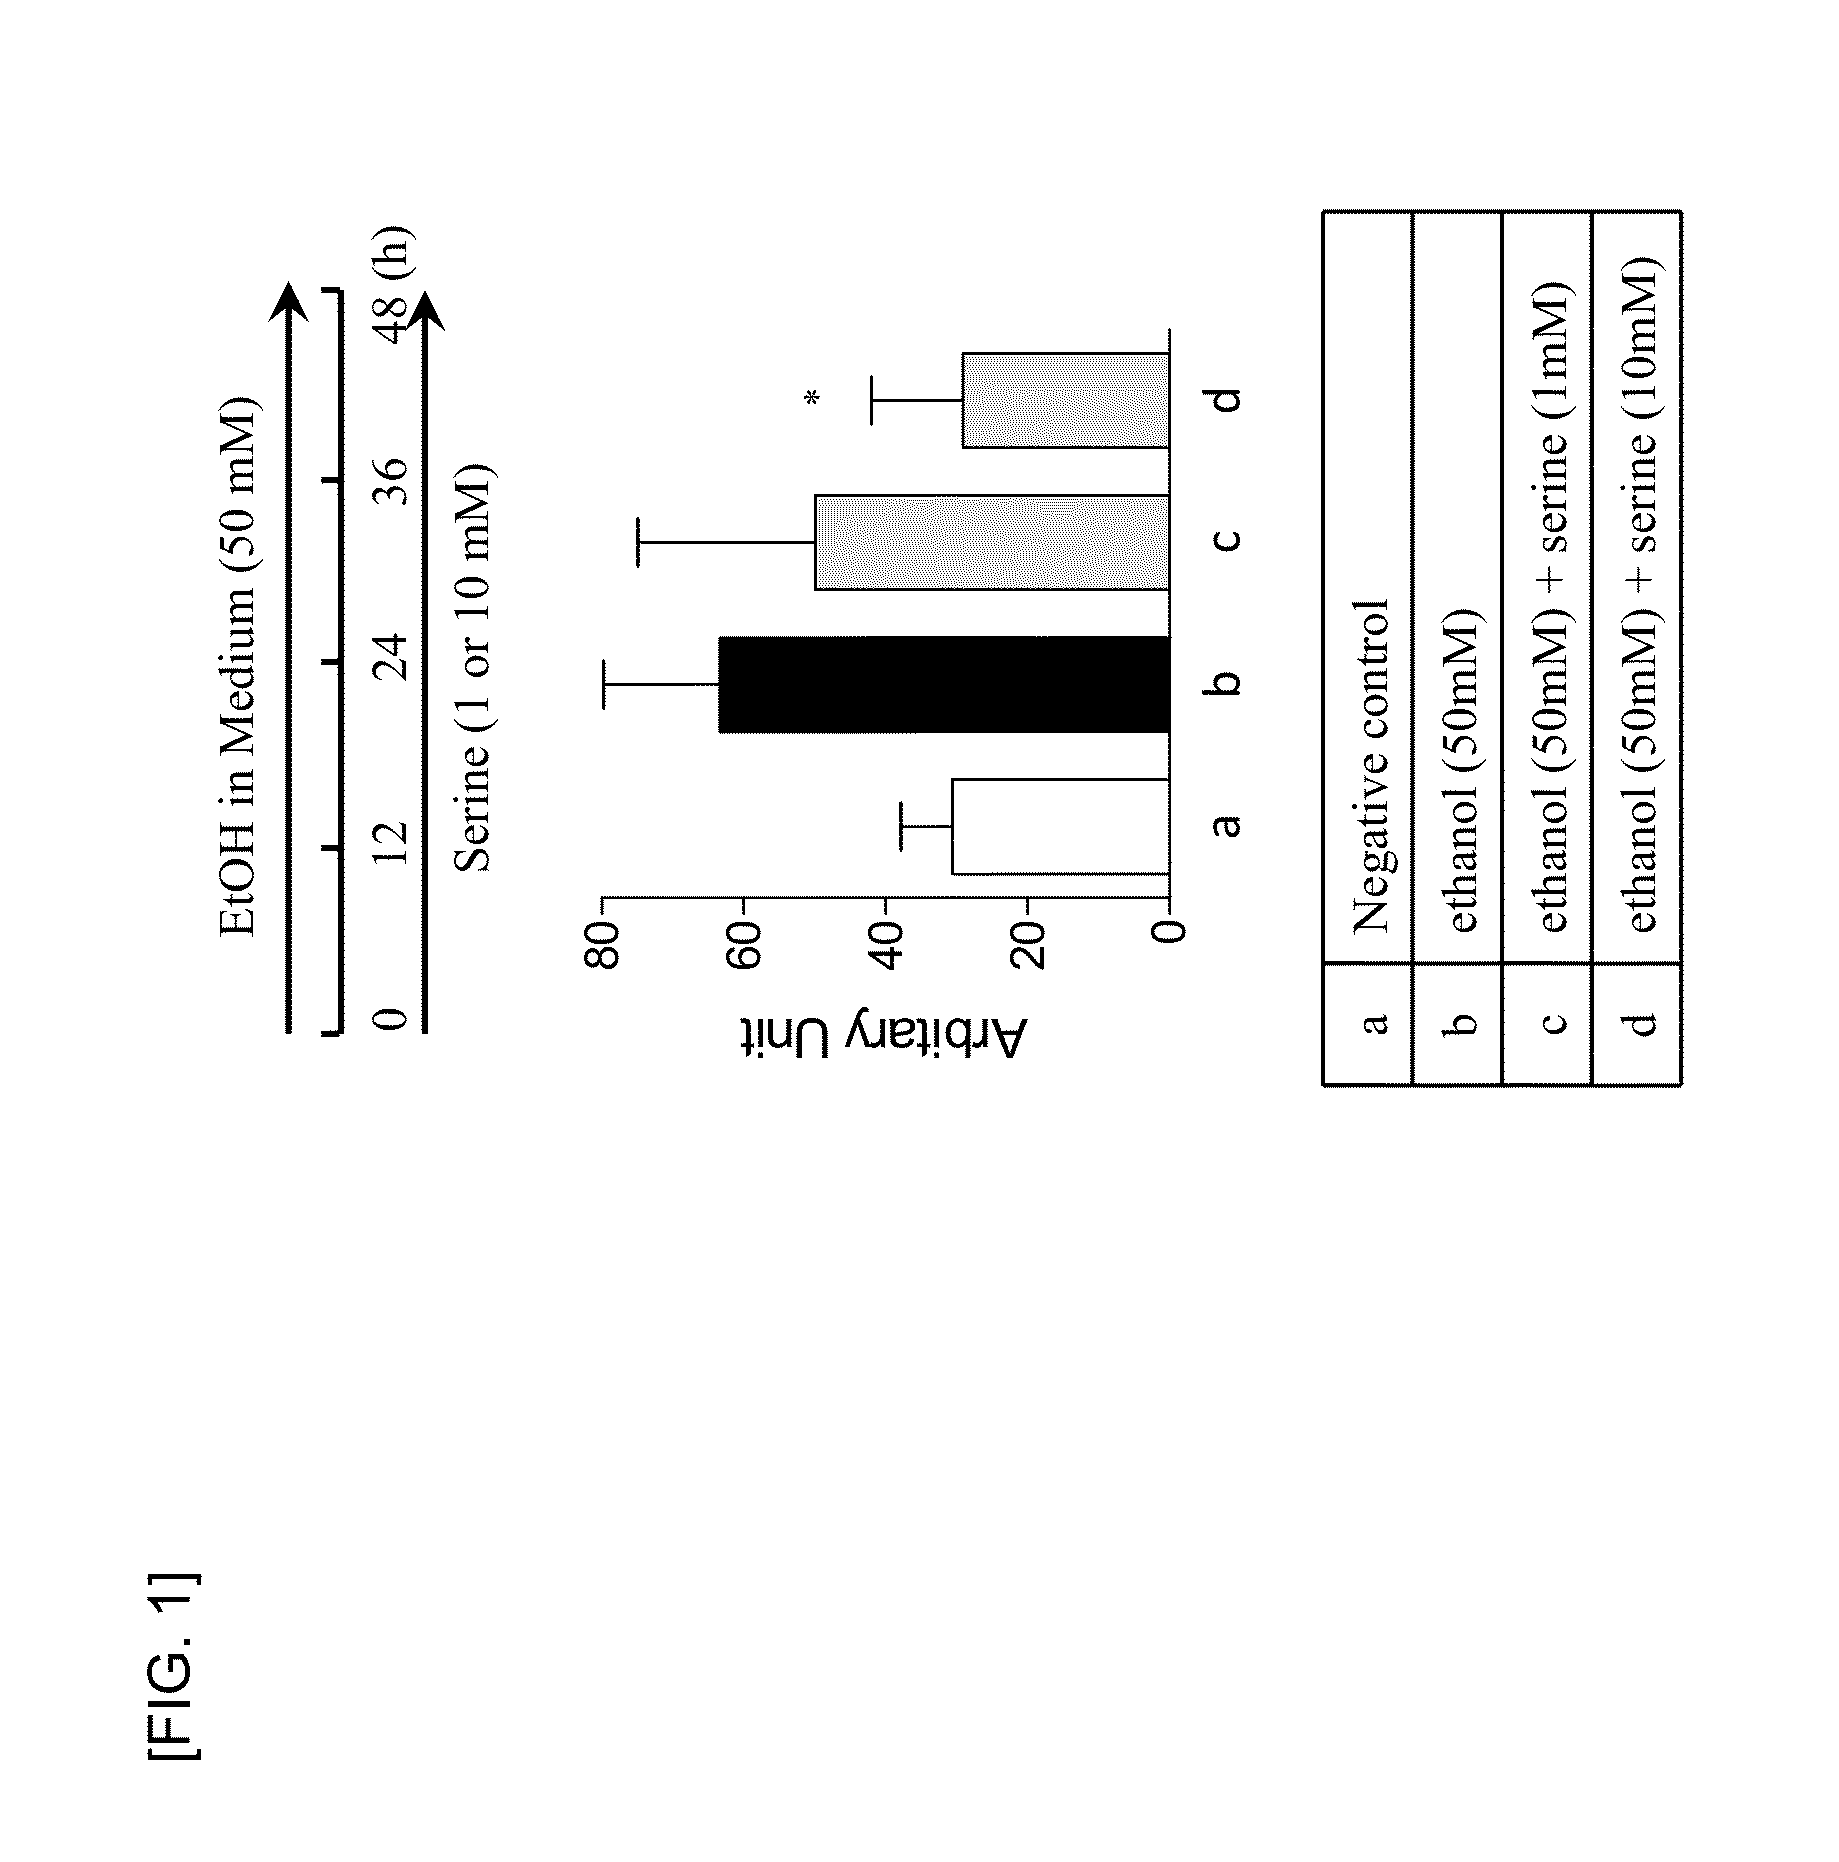 Composition containing serine as an active ingredient for the prevention and treatment of fatty liver diseases, and the use thereof